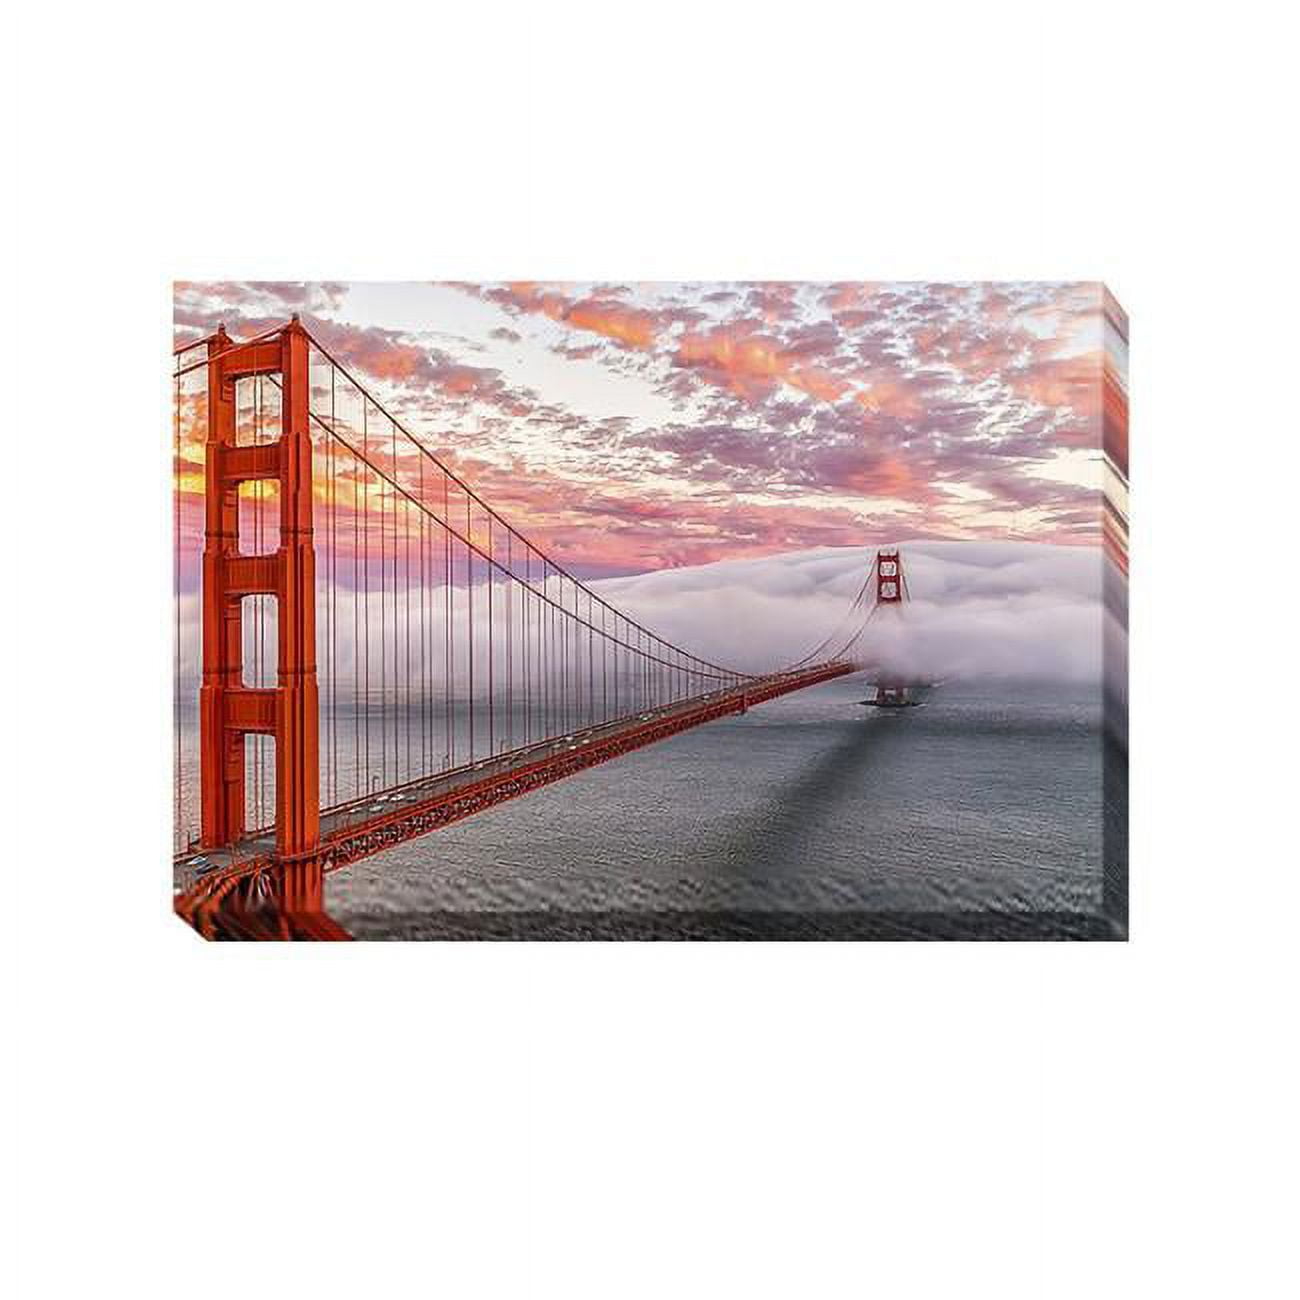 2436g277ig Evening Commute By Dave Gordon Custom Gallery-wrapped Canvas Giclee Art - Ready To Hang, 24 X 36 X 1.5 In.